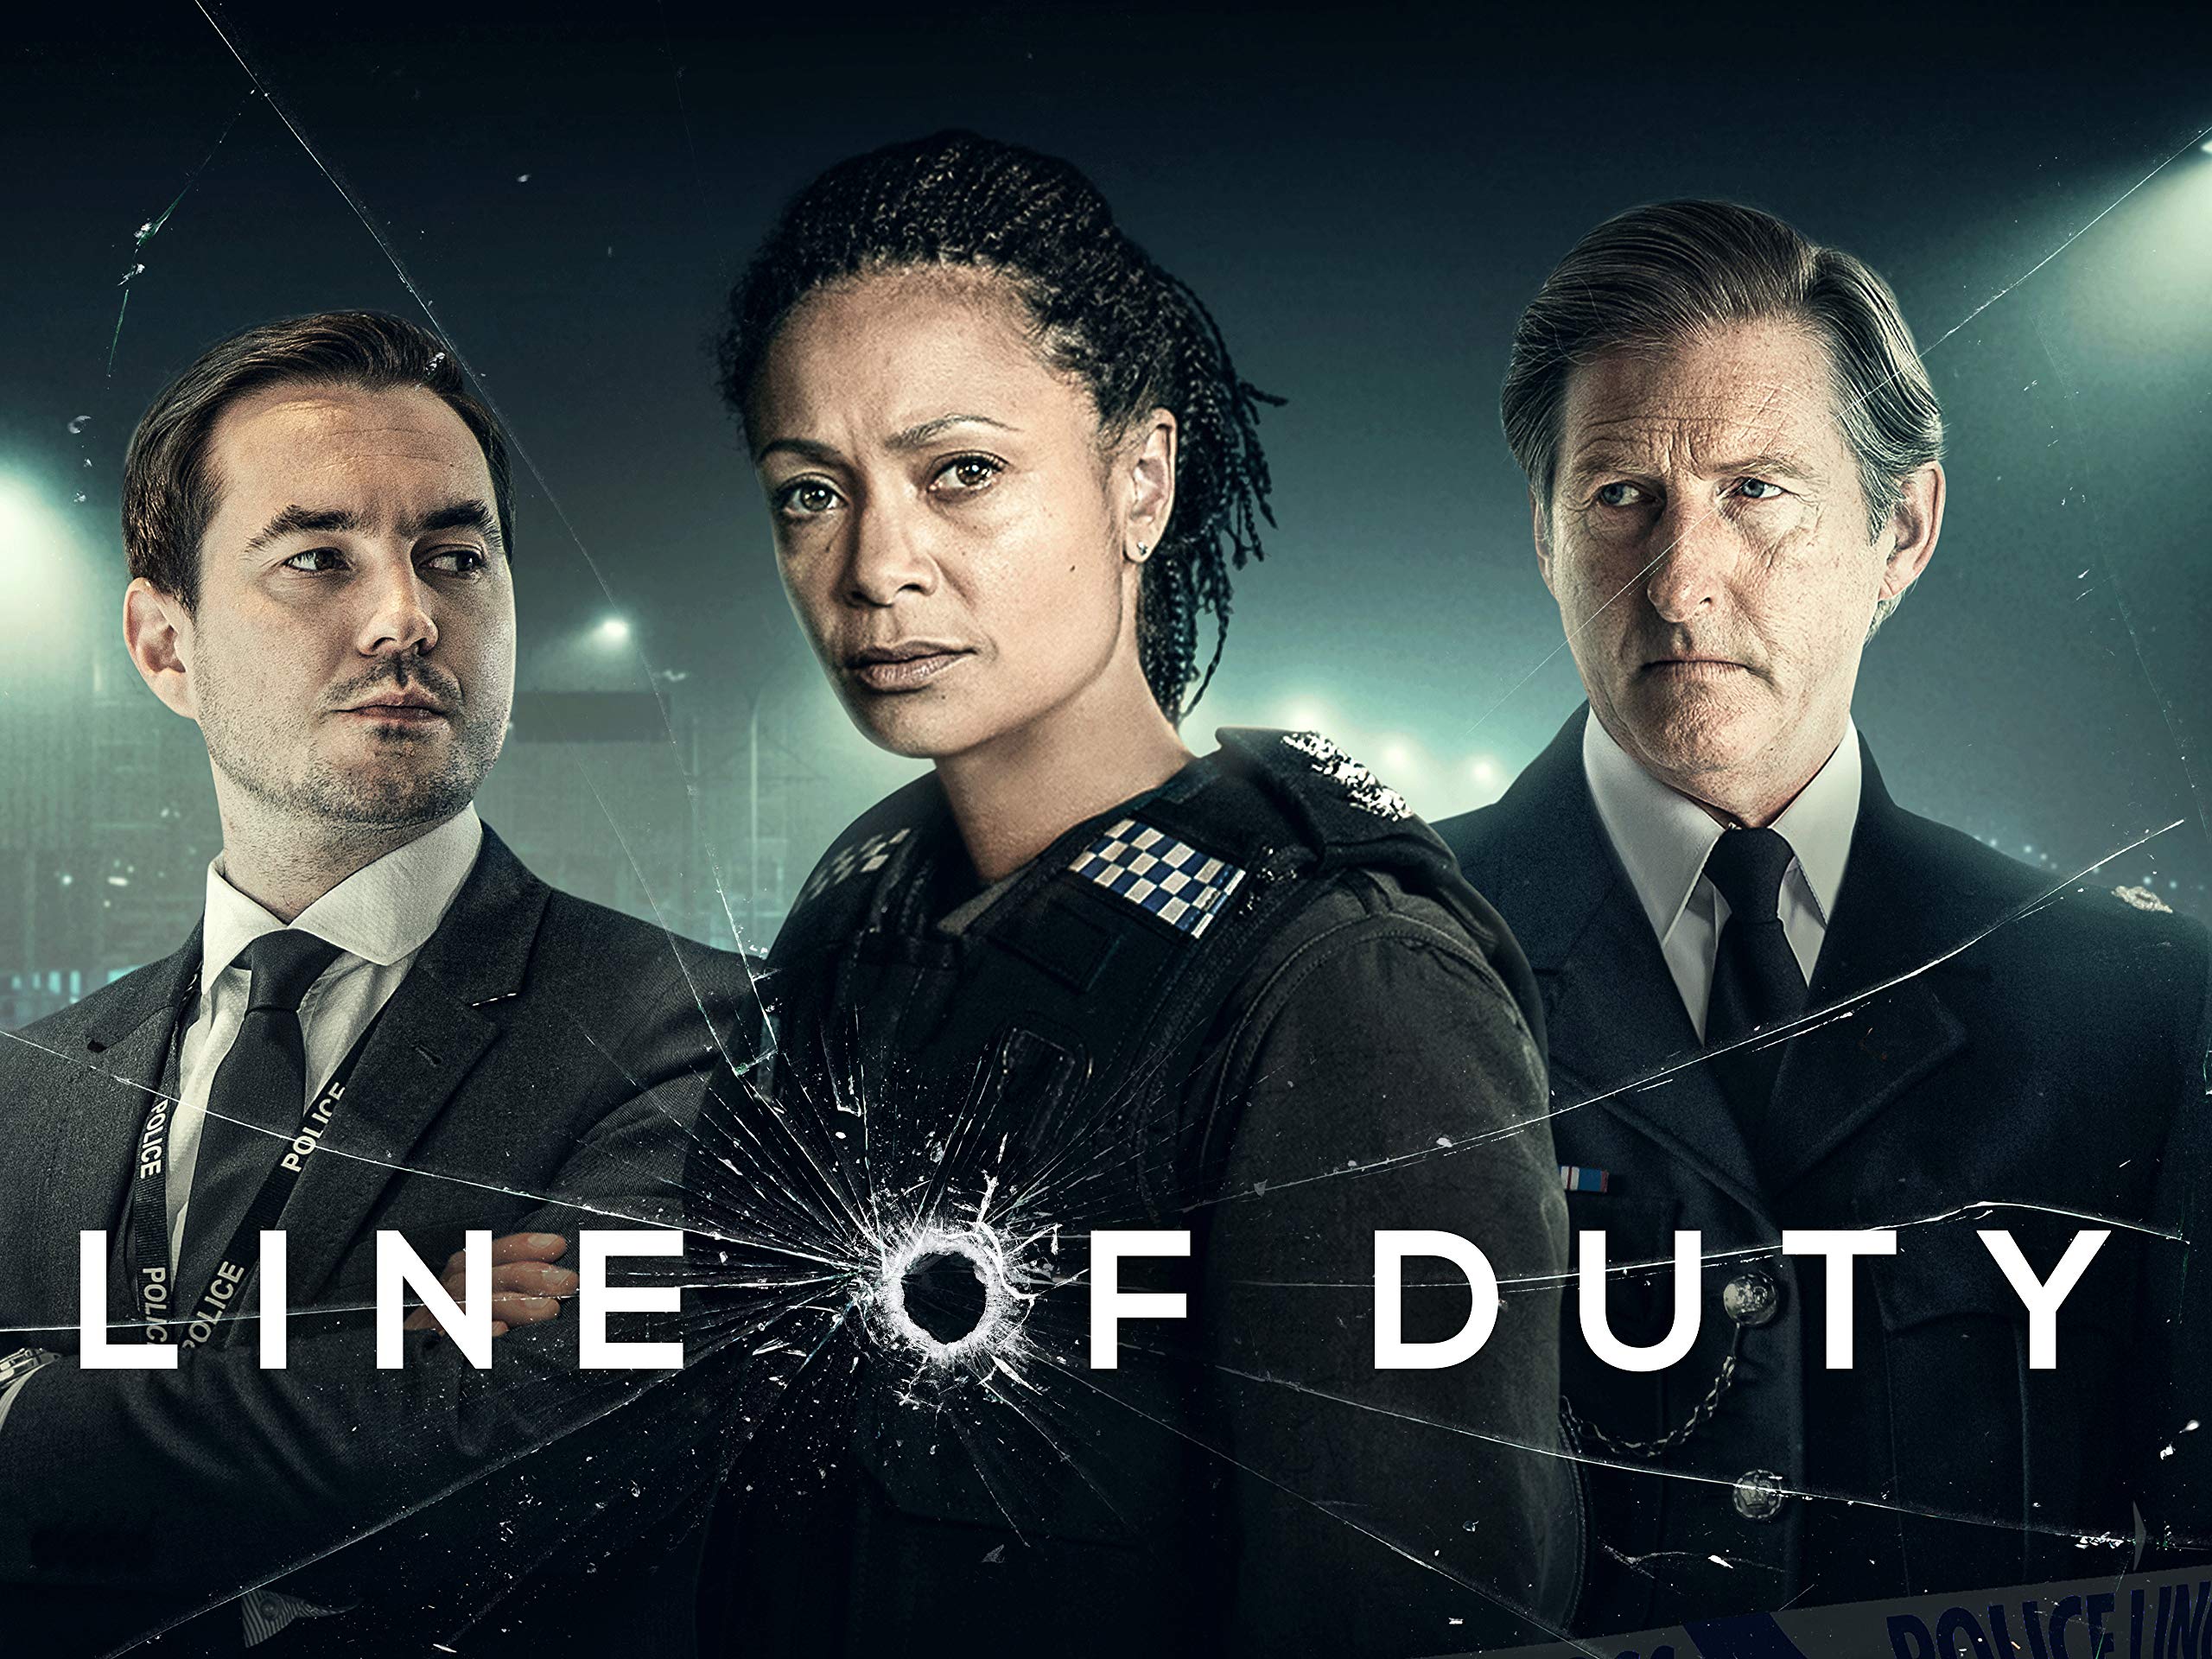 Line Of Duty / Official account for bbcone's lineofduty written